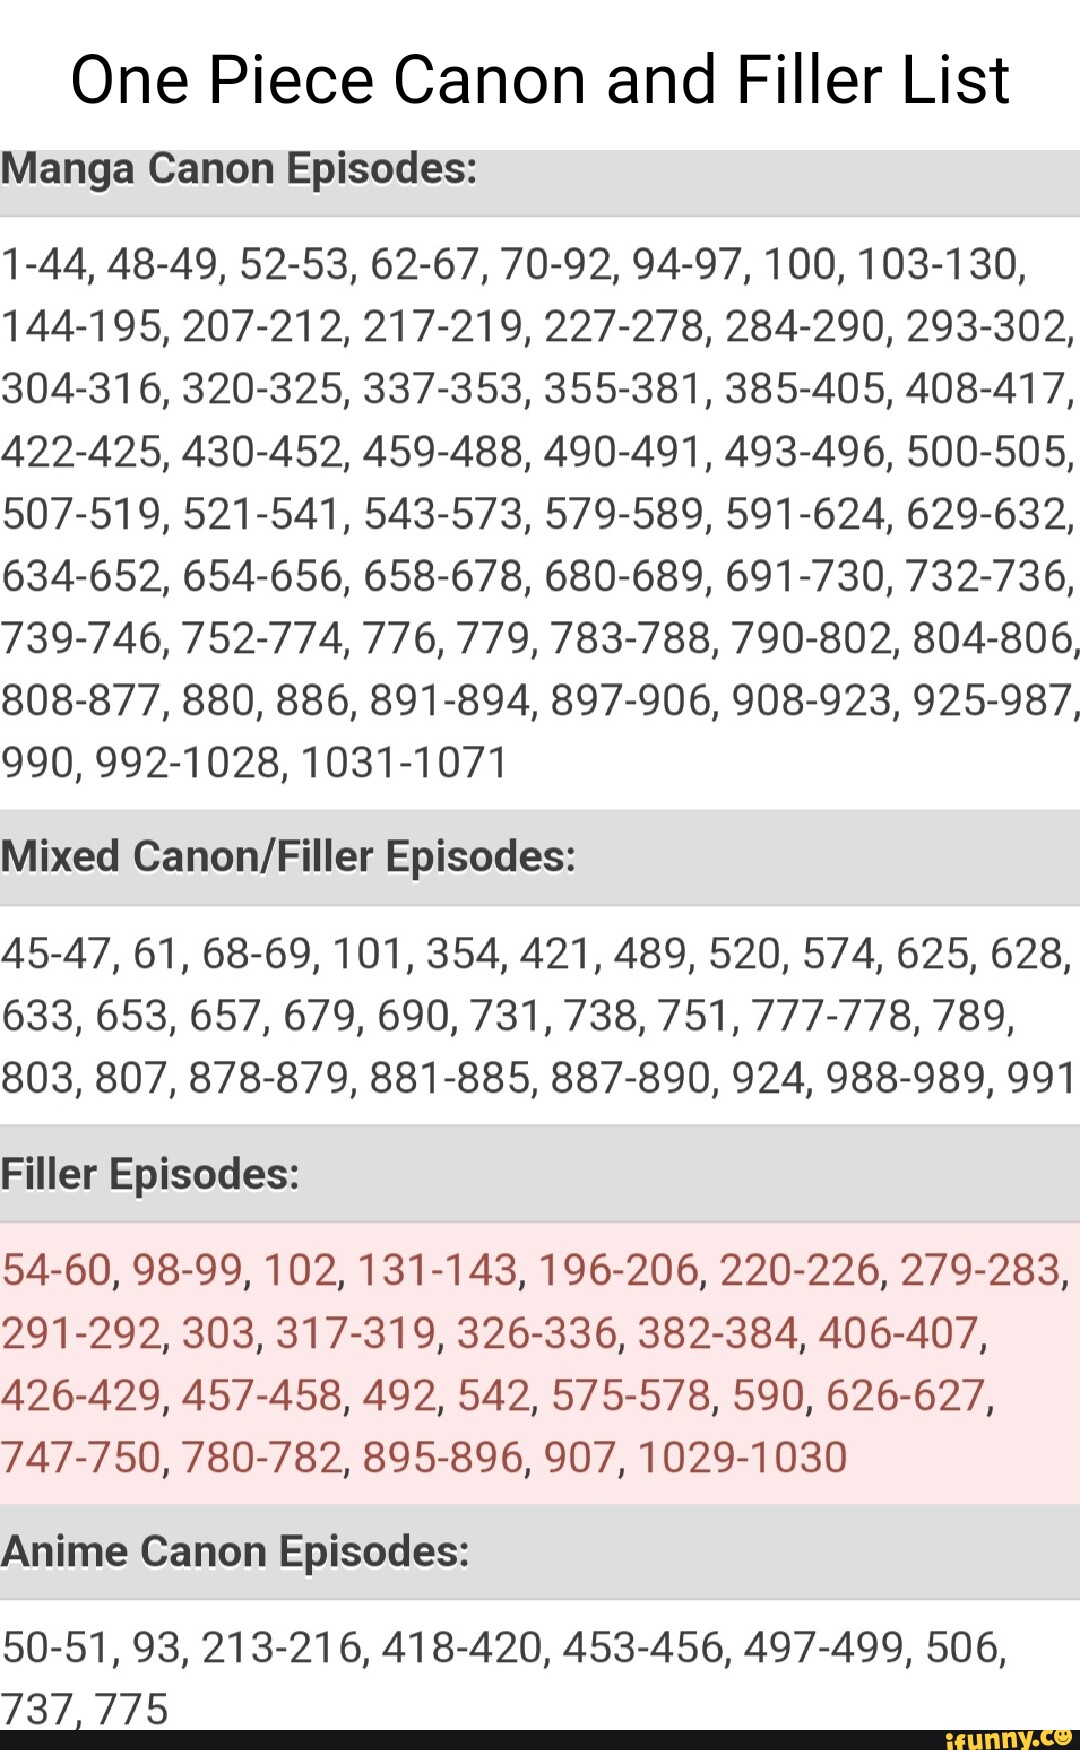 One Piece Canon And Filler List Manga Canon Episodes: 1-44, 48-49, 52-53,  62-67, 70-92, 94-97, 100, 103-130, 144-195, 207-212, 217-219, 227-278,  284-290, 293-302, 304-316, 320-325, 337-353, 355-381, 385-405, 408-417,  422-425, 430-452, 459-488, 490-491 ...